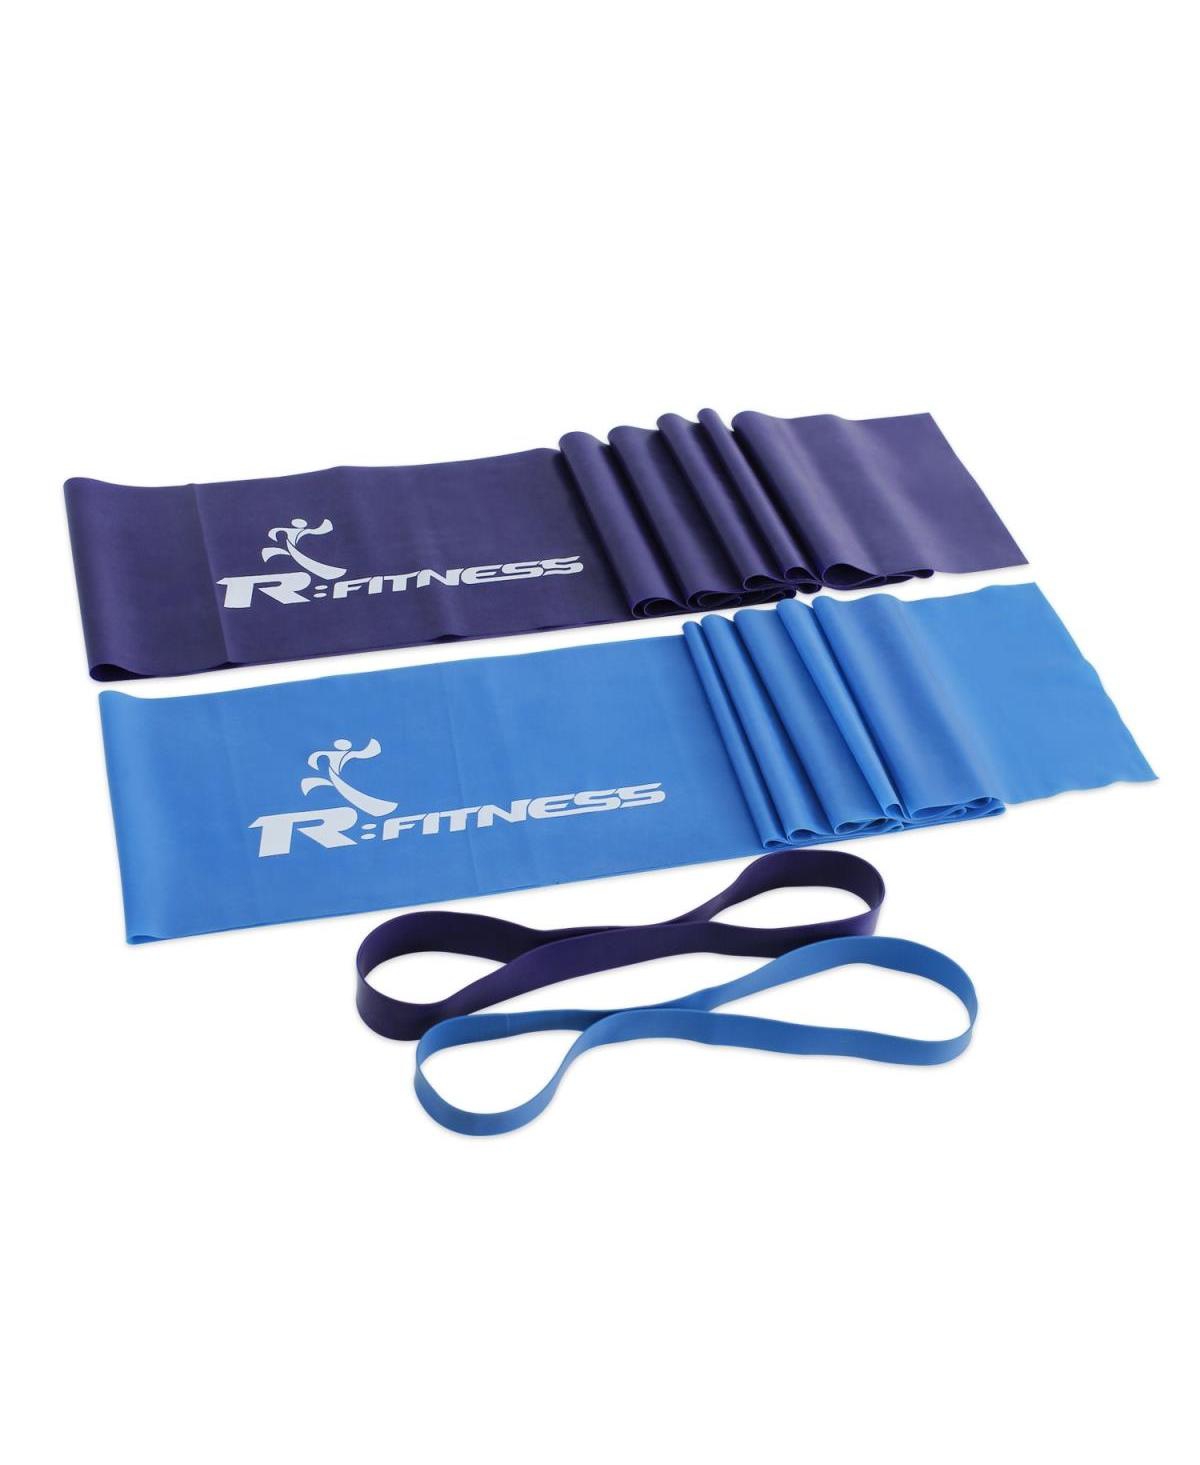 Rfitness Professional Training Exercise Fitness Resistance Band - 4 Piece - Open miscellaneous